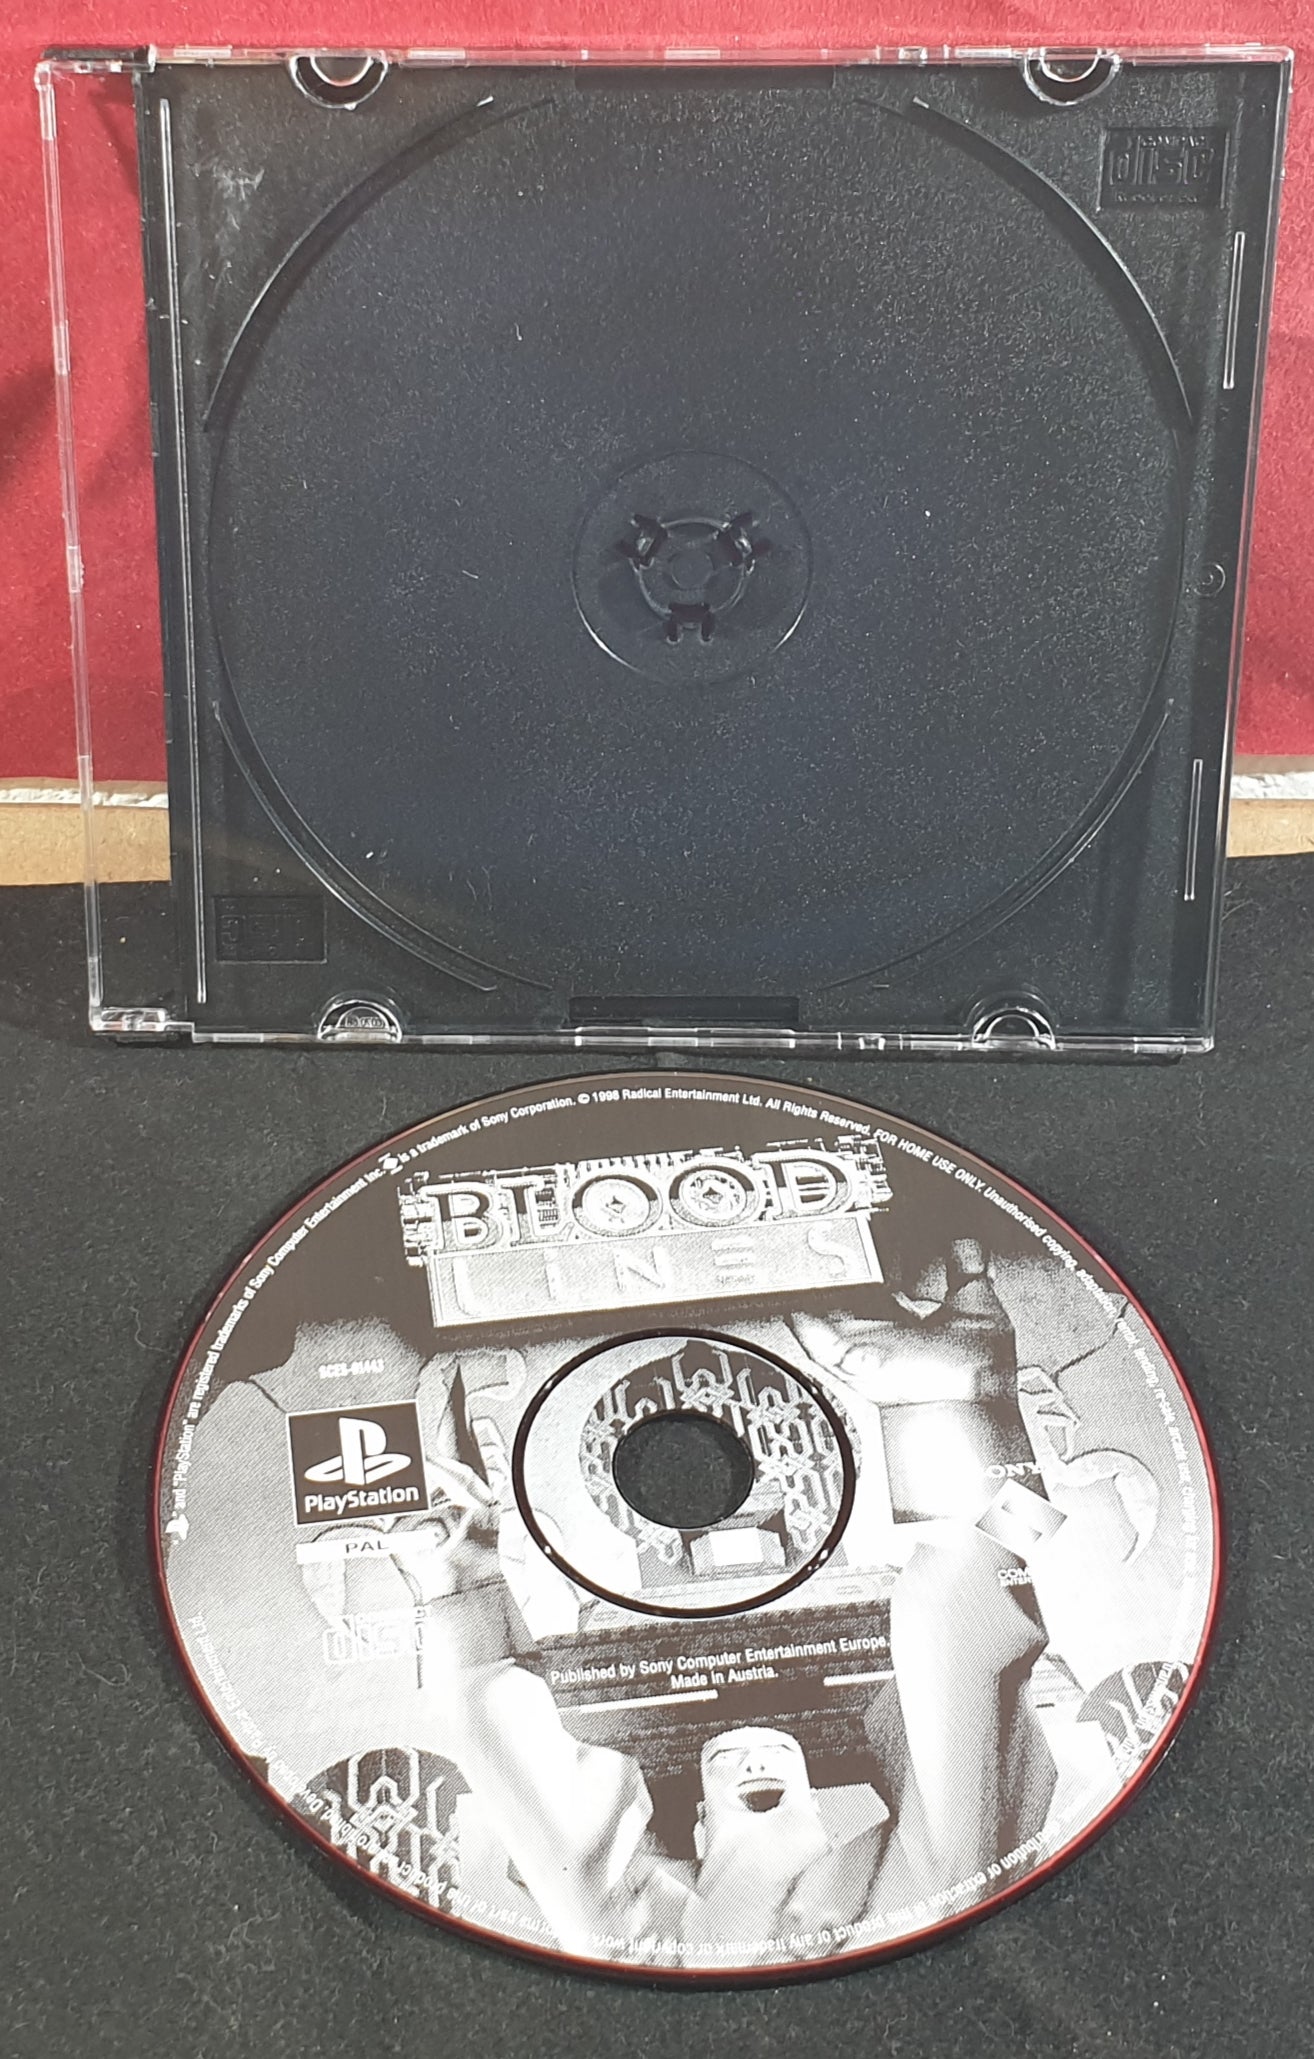 Blood Lines Sony Playstation 1 (PS1) Game Disc Only